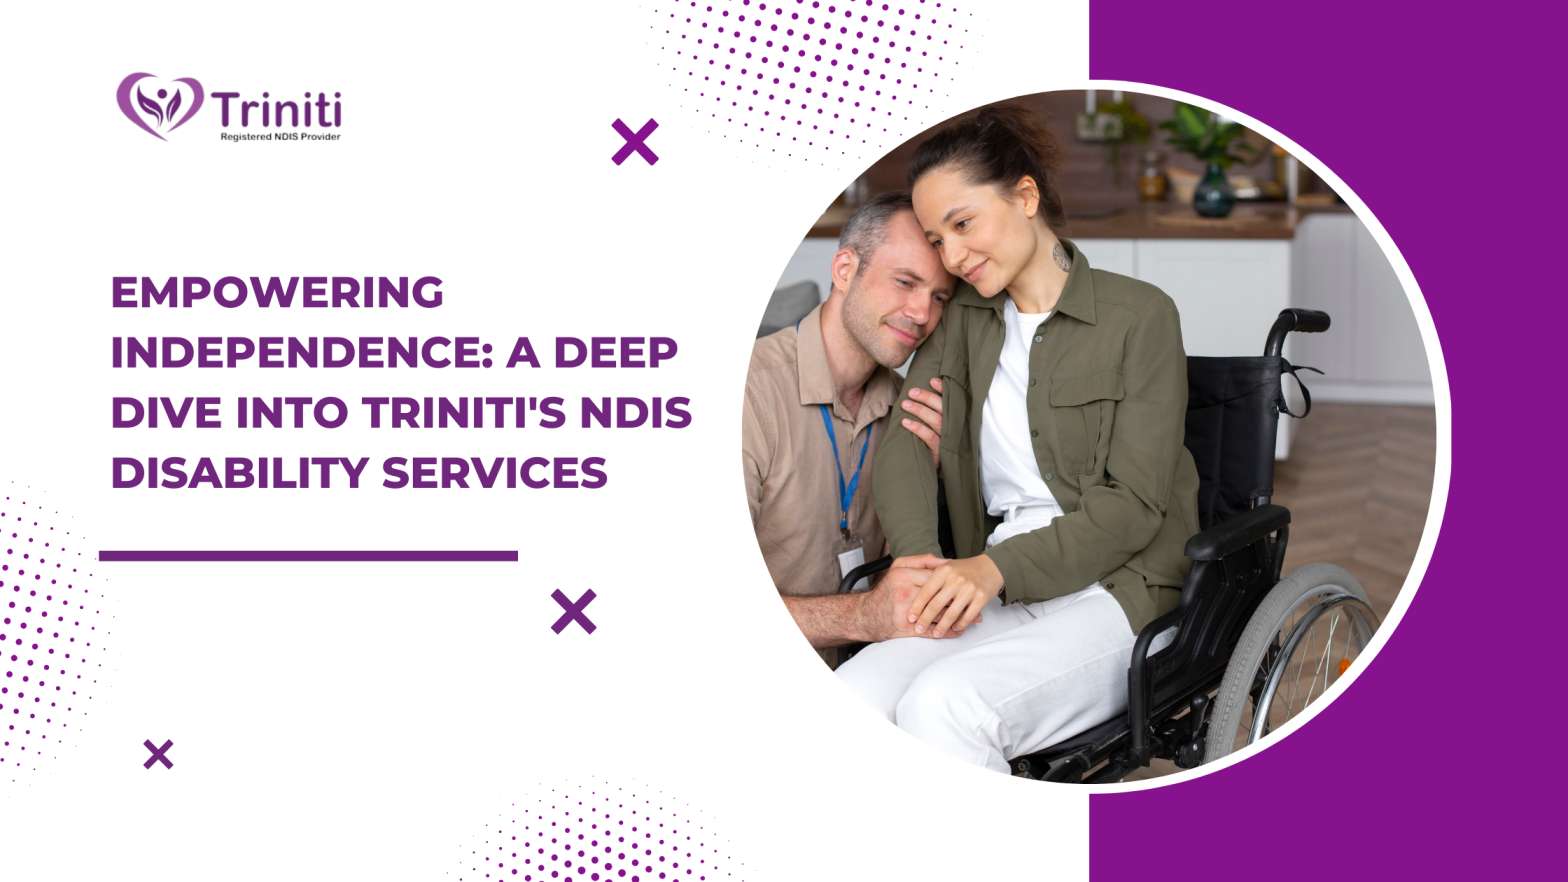 Empowering Independence: A Deep Dive into Triniti’s NDIS Disability Services